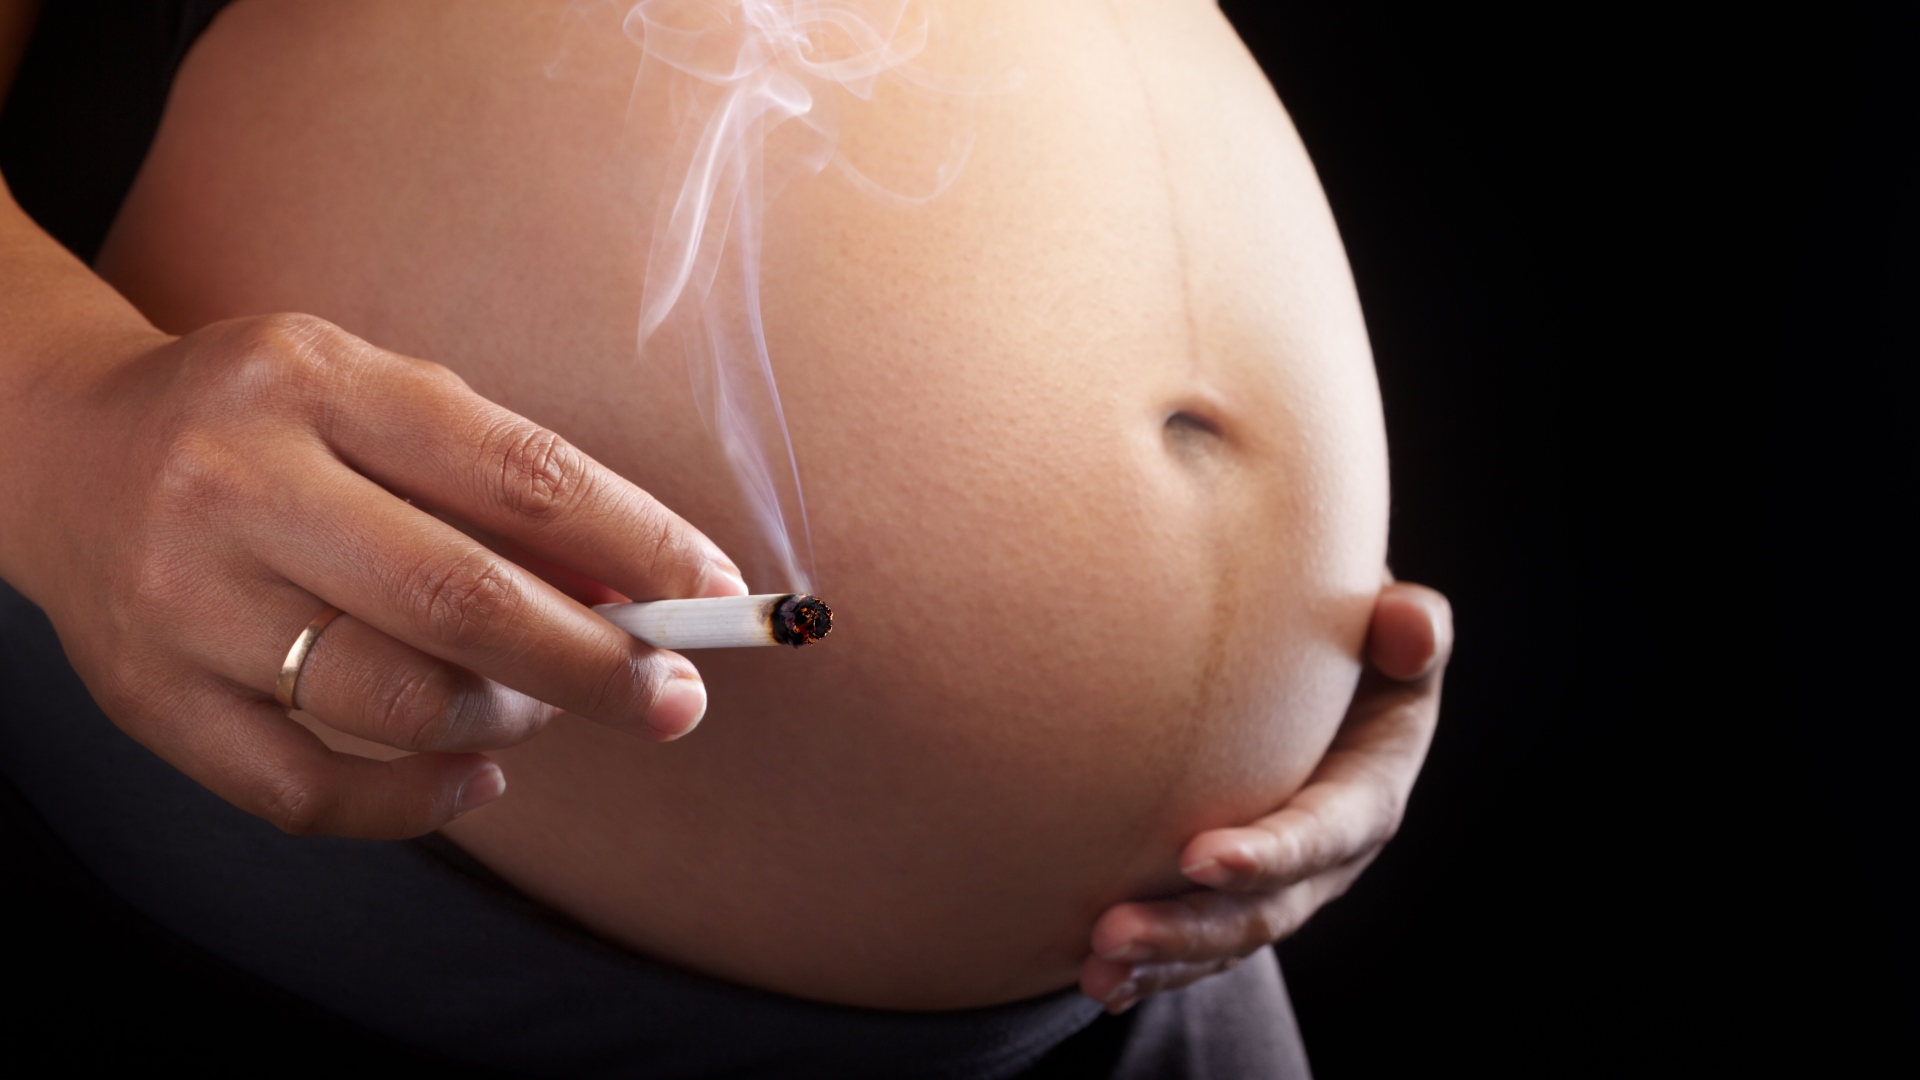 research on smoking during pregnancy